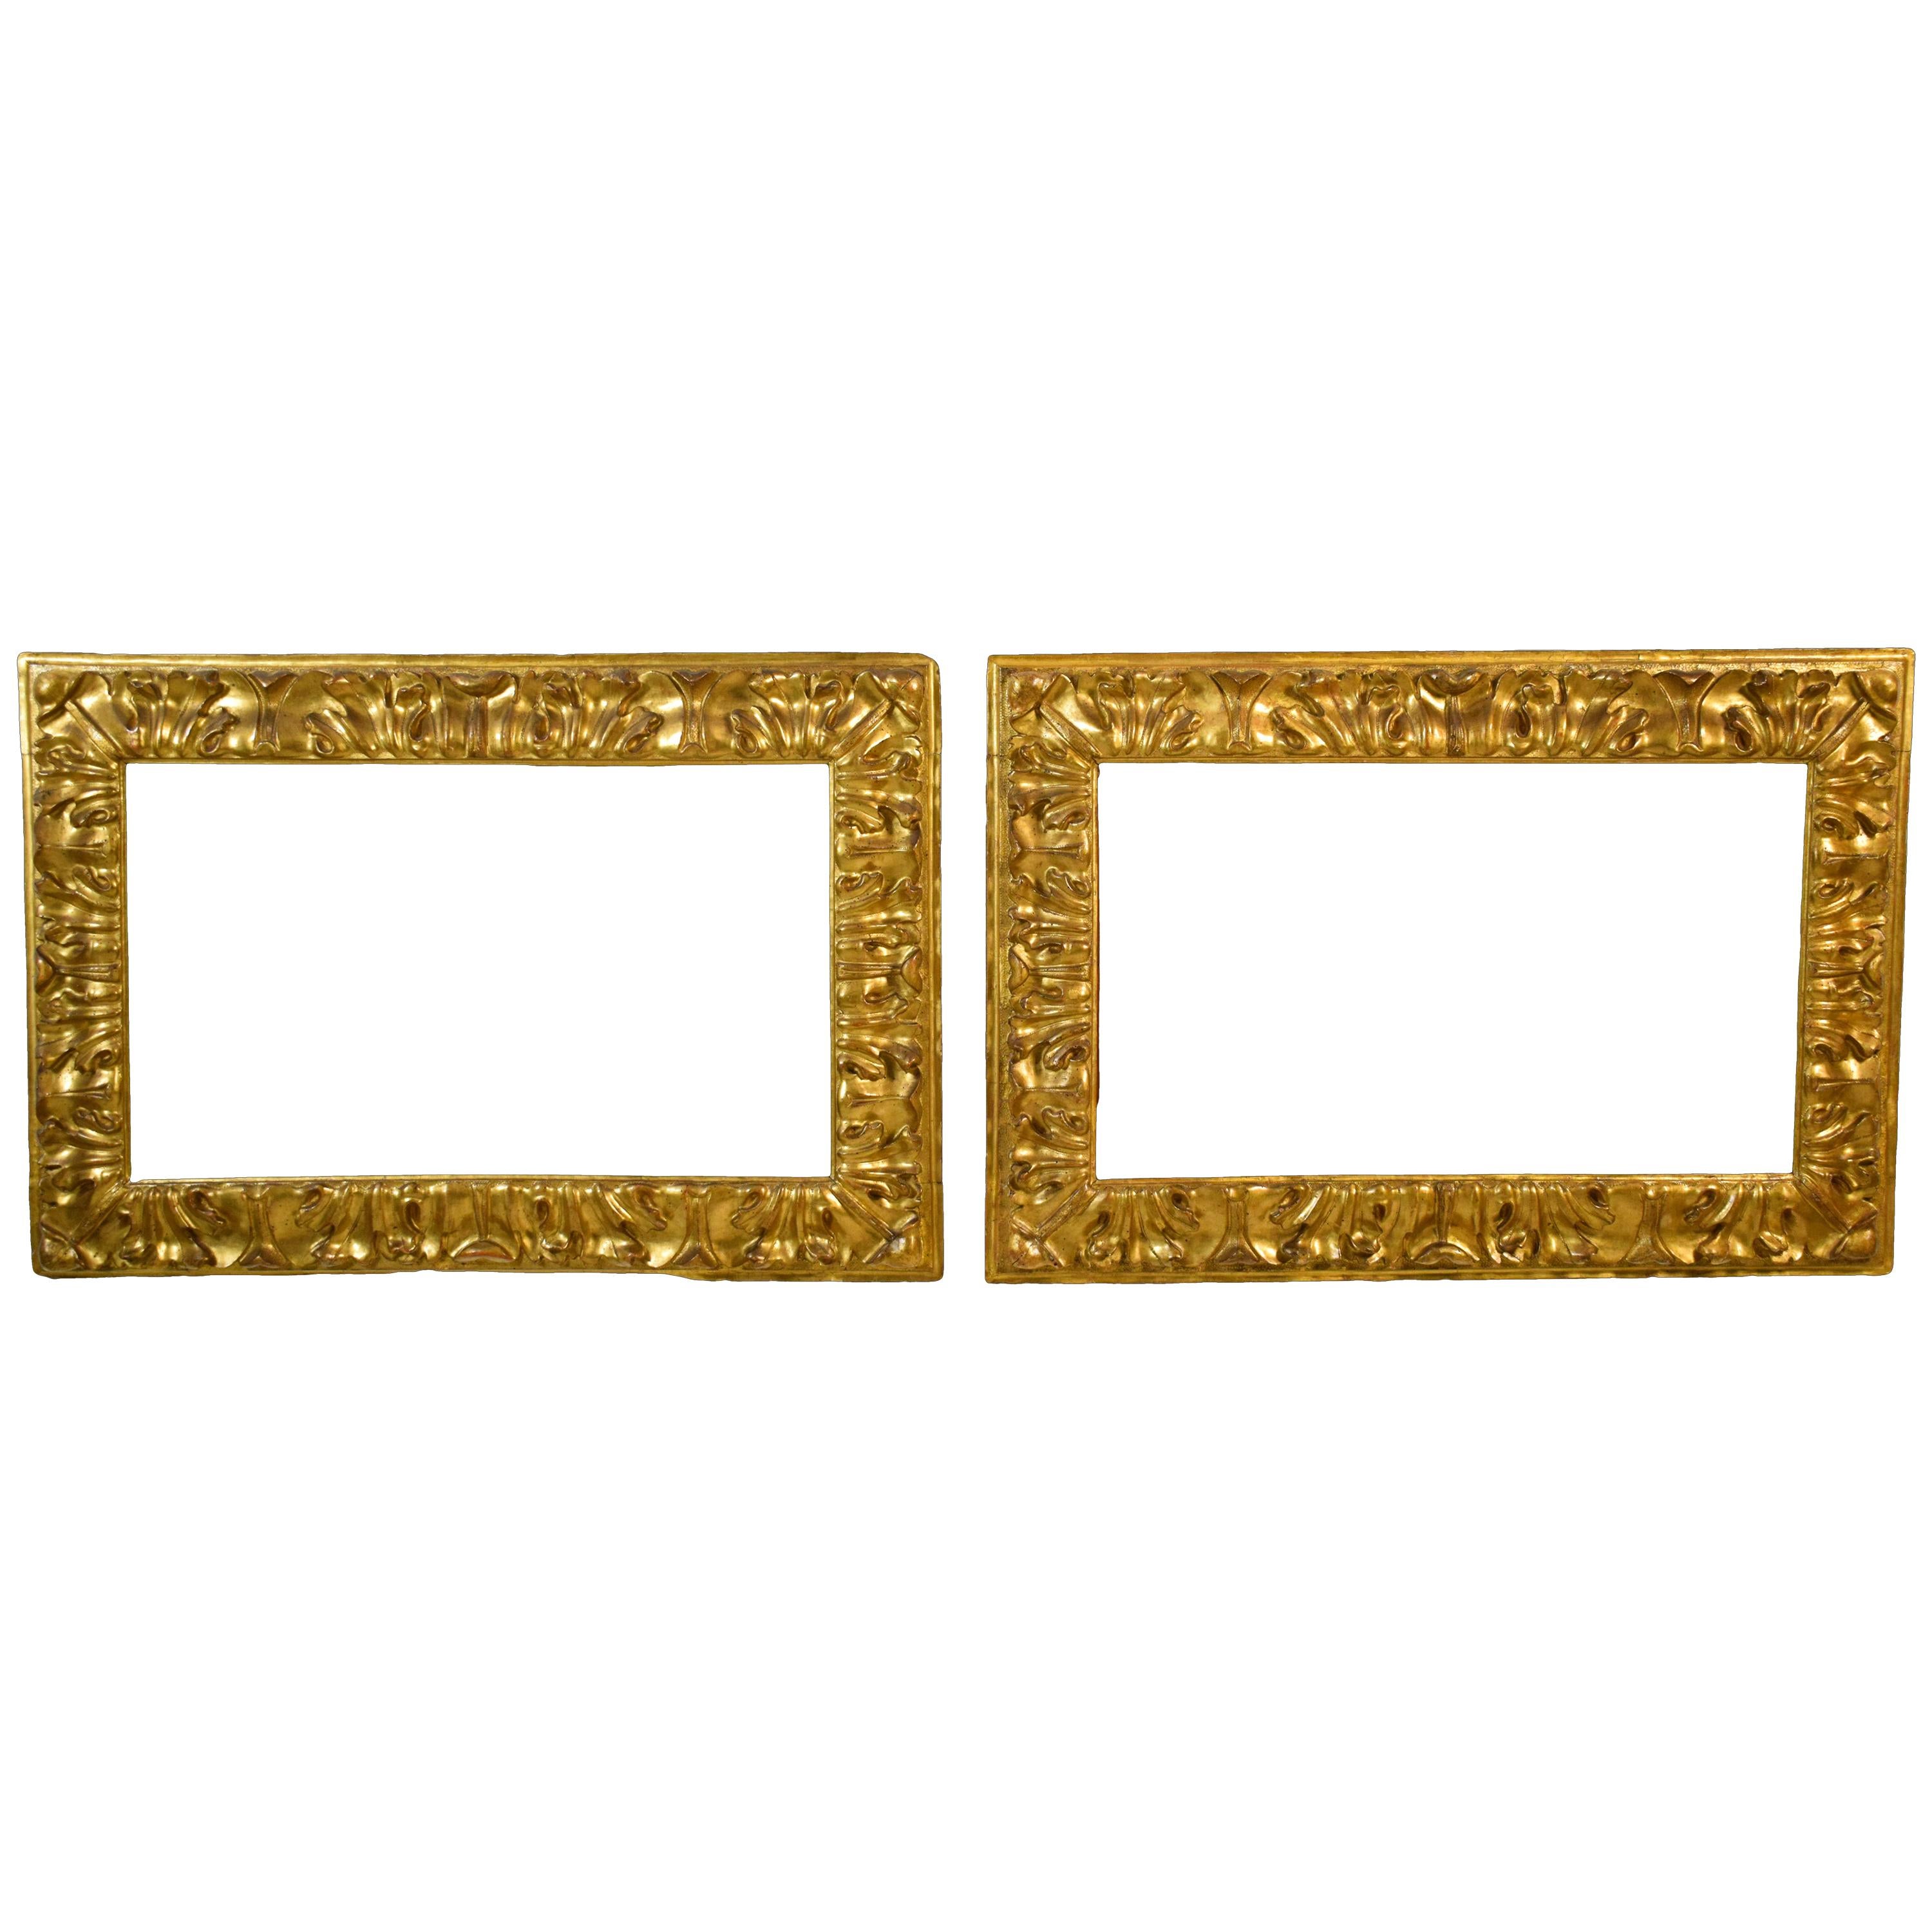 17th Century, Pair of Italian Carved Giltwood Frames